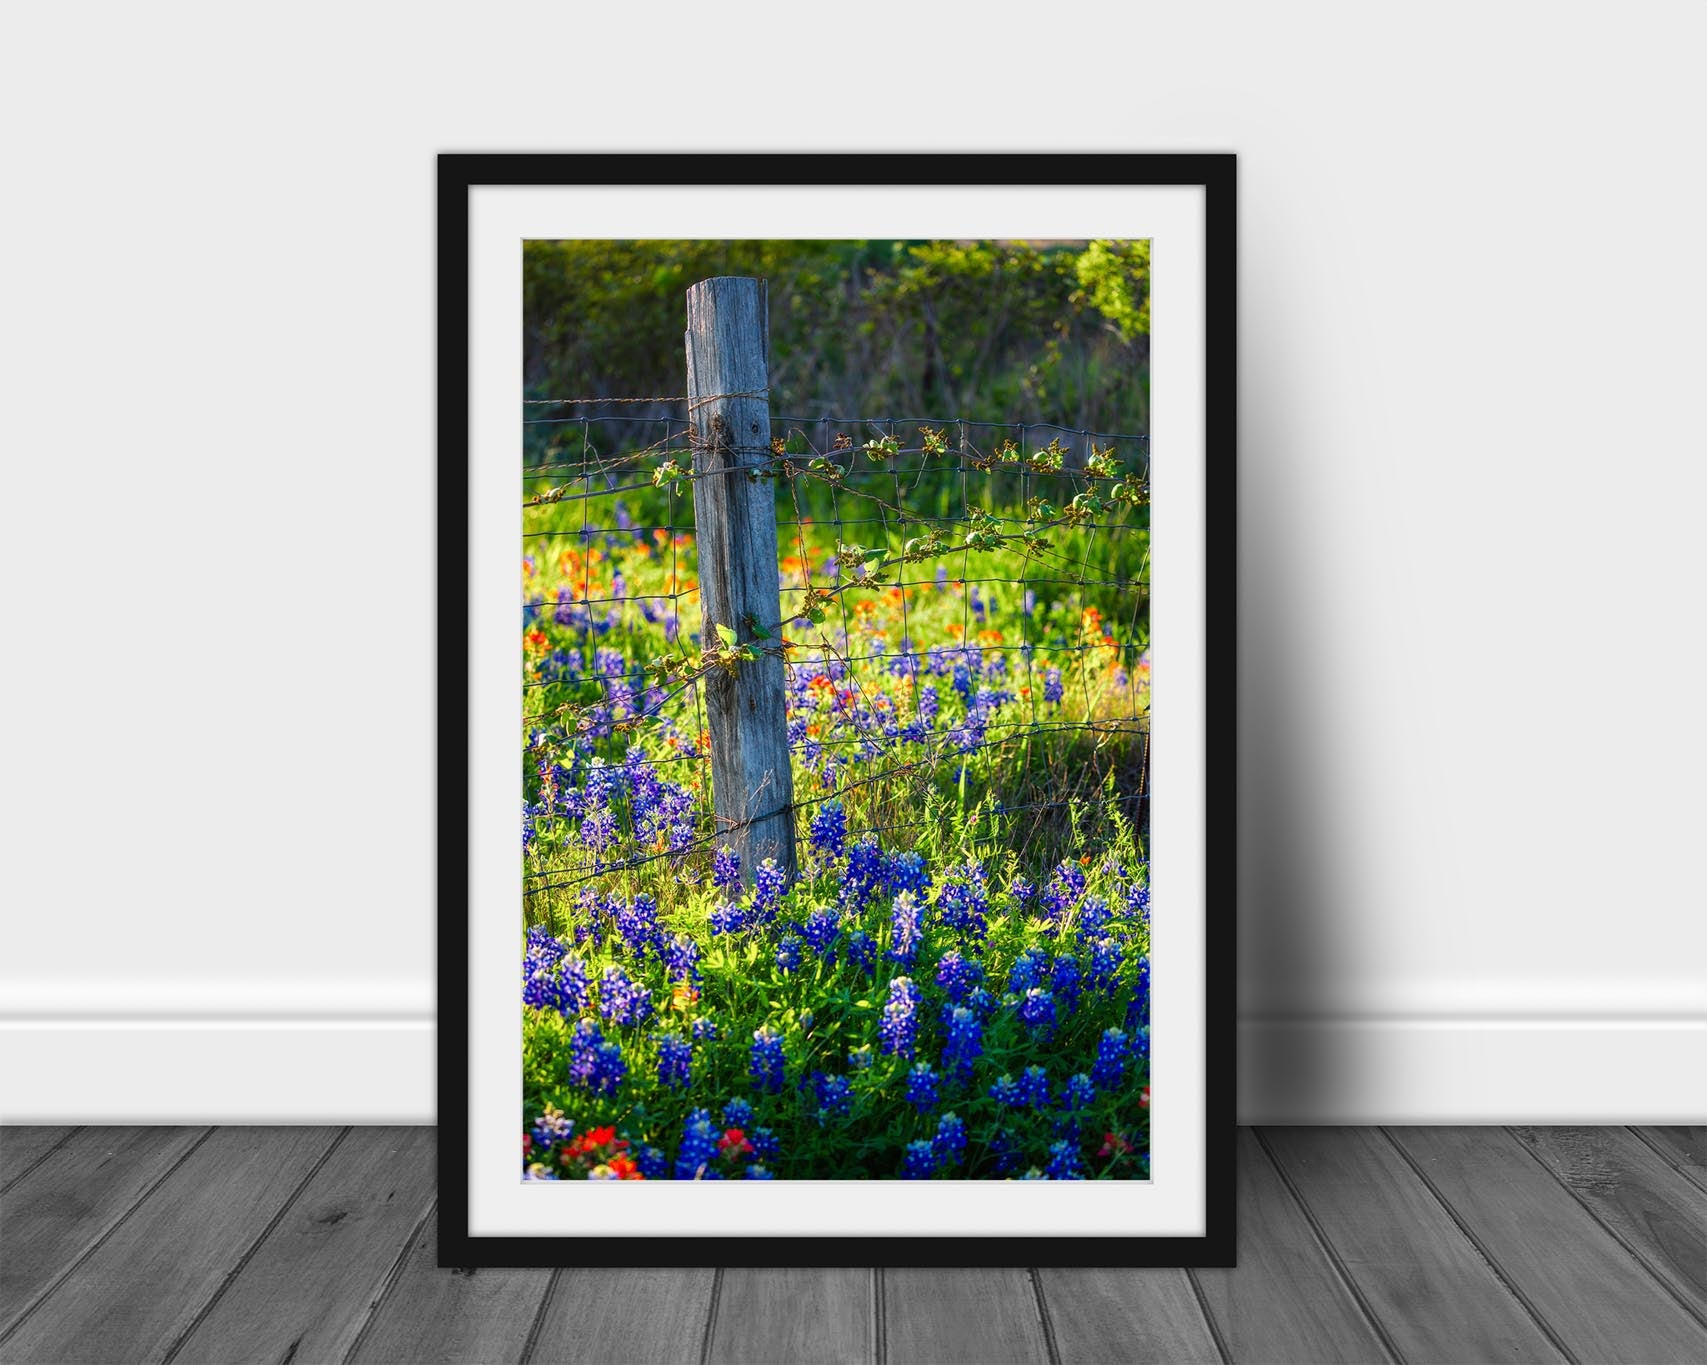 Vertical framed and matted country print of a fence post surrounded by bluebonnets and Indian paintbrush wildflowers on a spring day in Texas by Sean Ramsey of Southern Plains Photography.